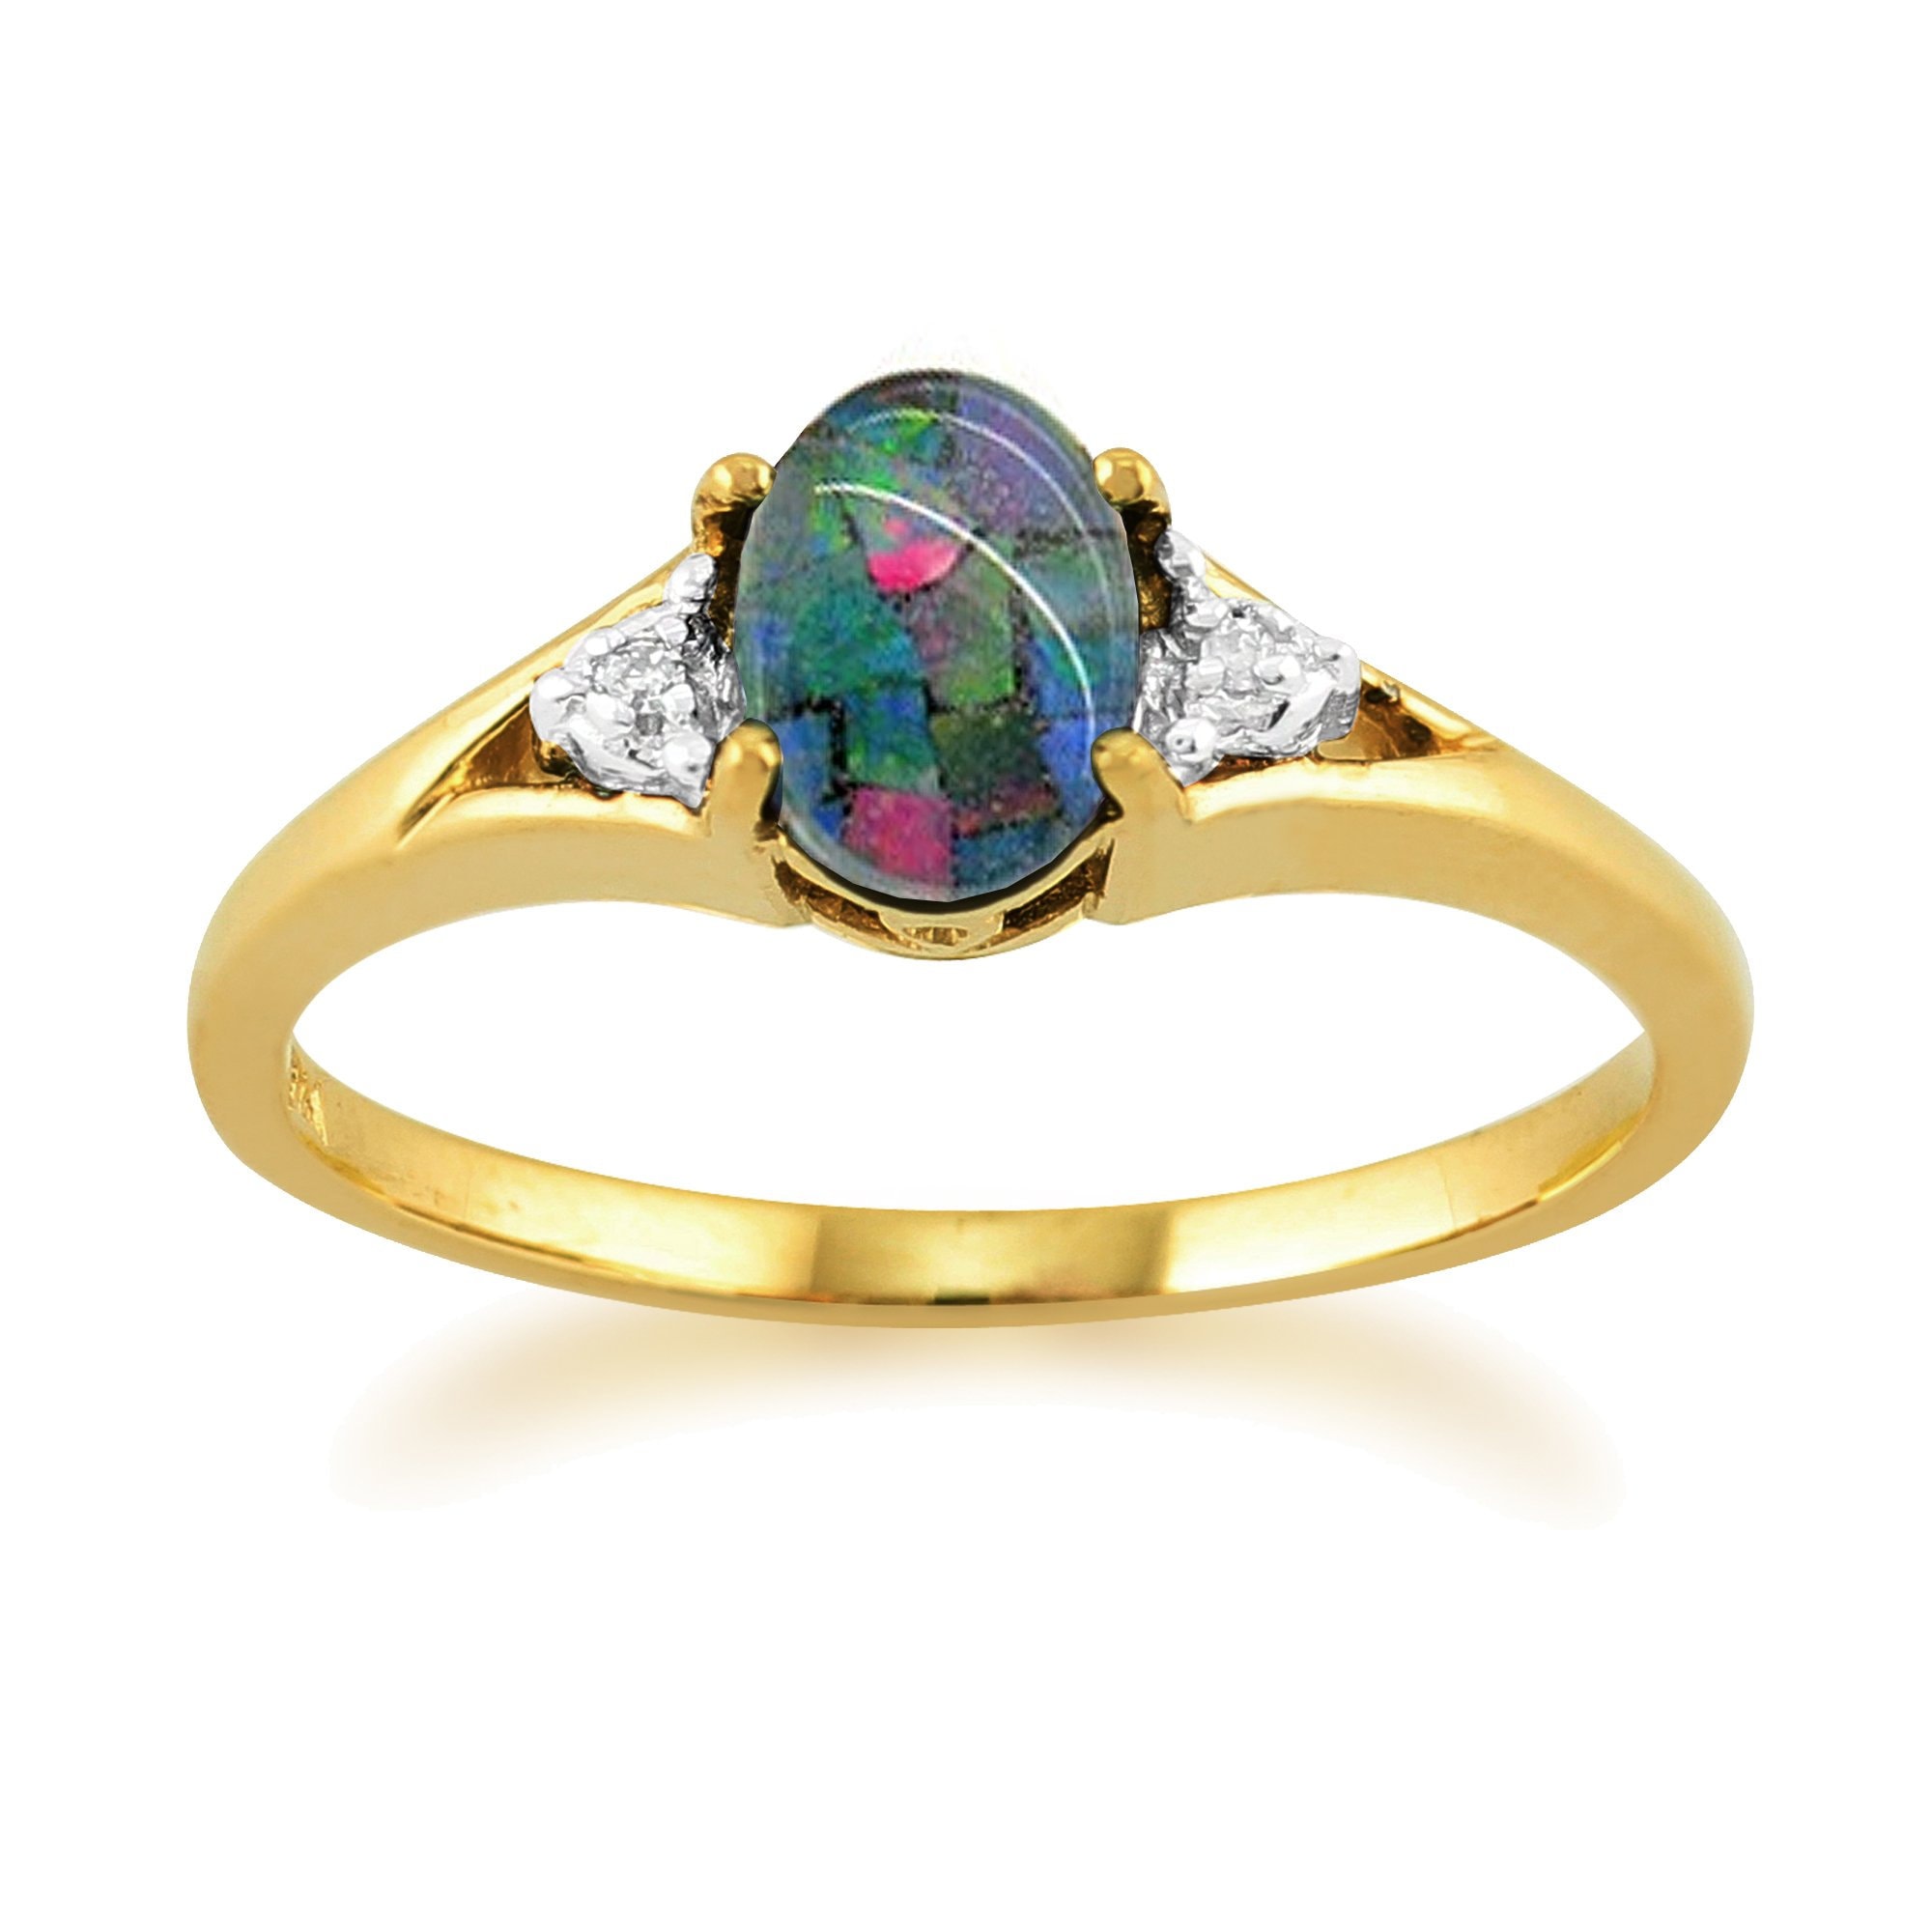 Triplet Opal & Diamond Ring in 9ct Yellow Gold - Etsy UK